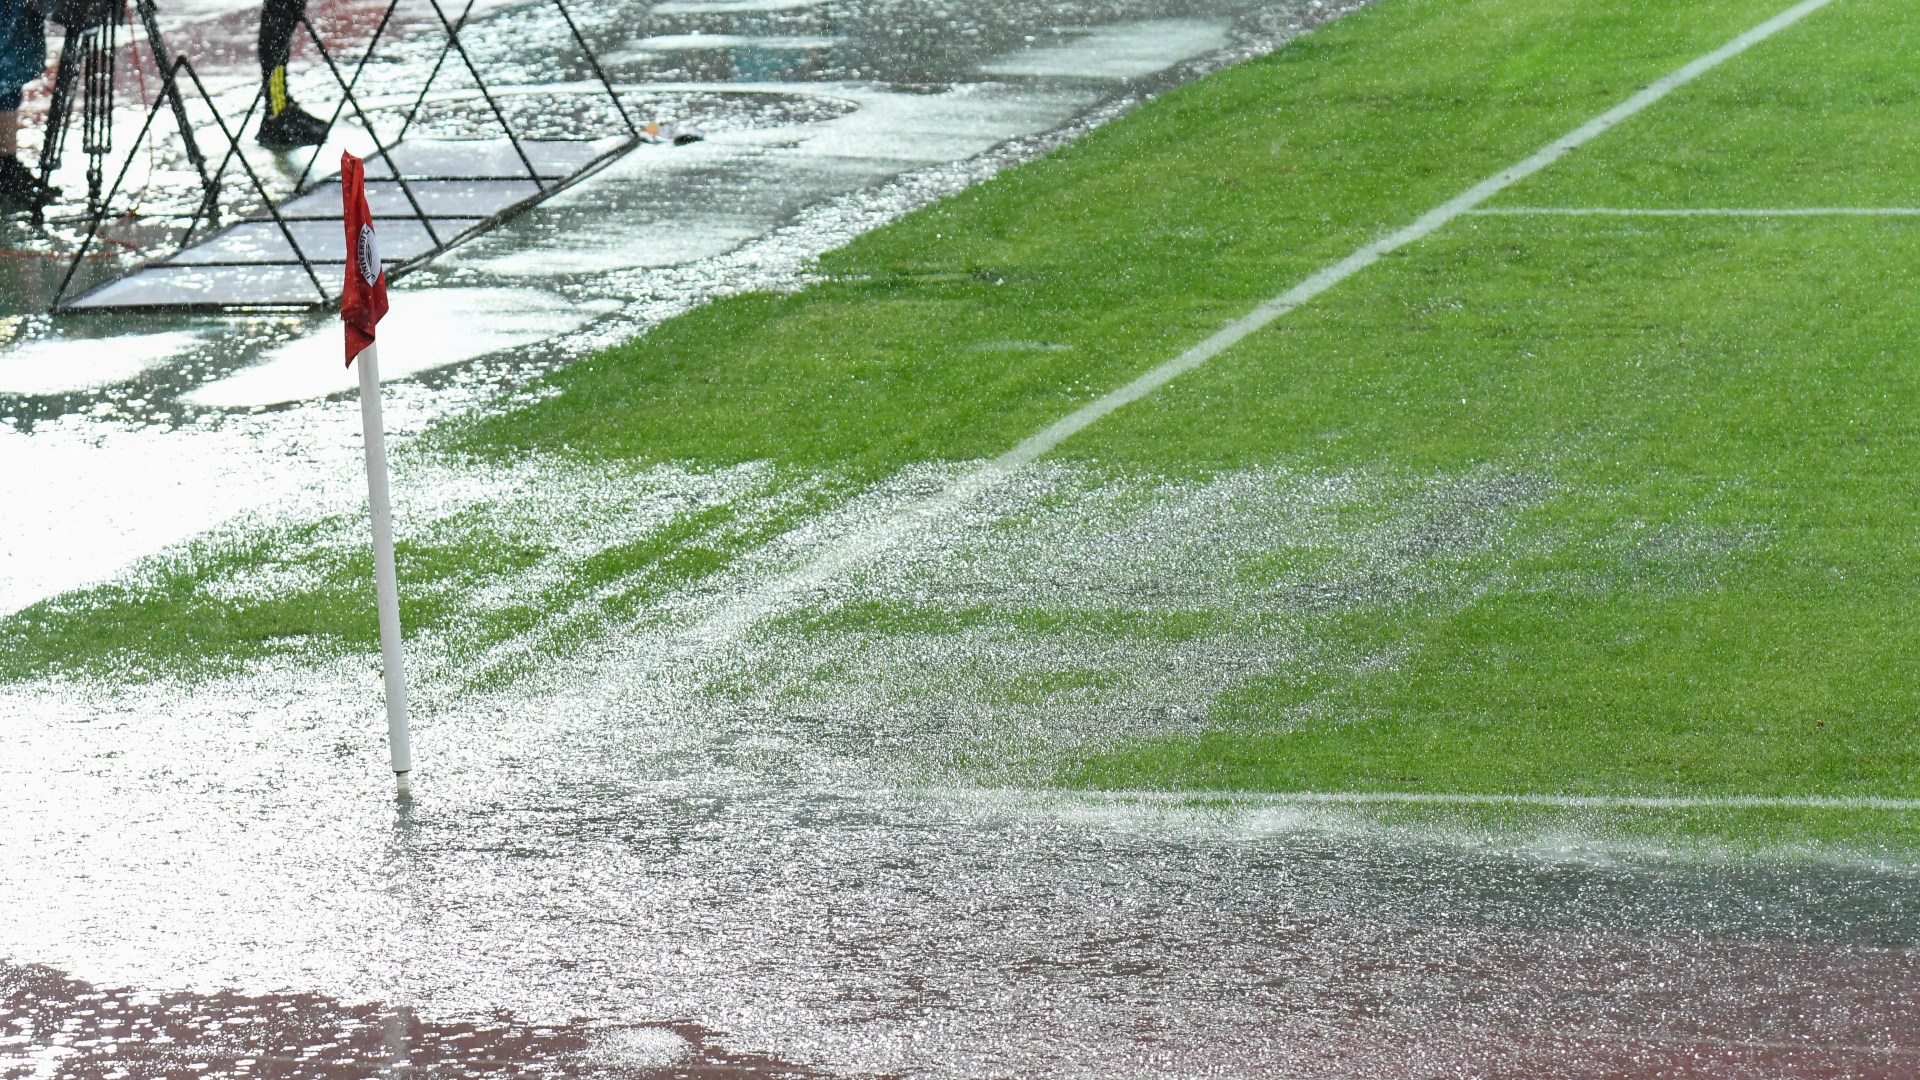 Football League fixtures battered by brutal weather with five games POSTPONED hours before kick-off including Wrexham